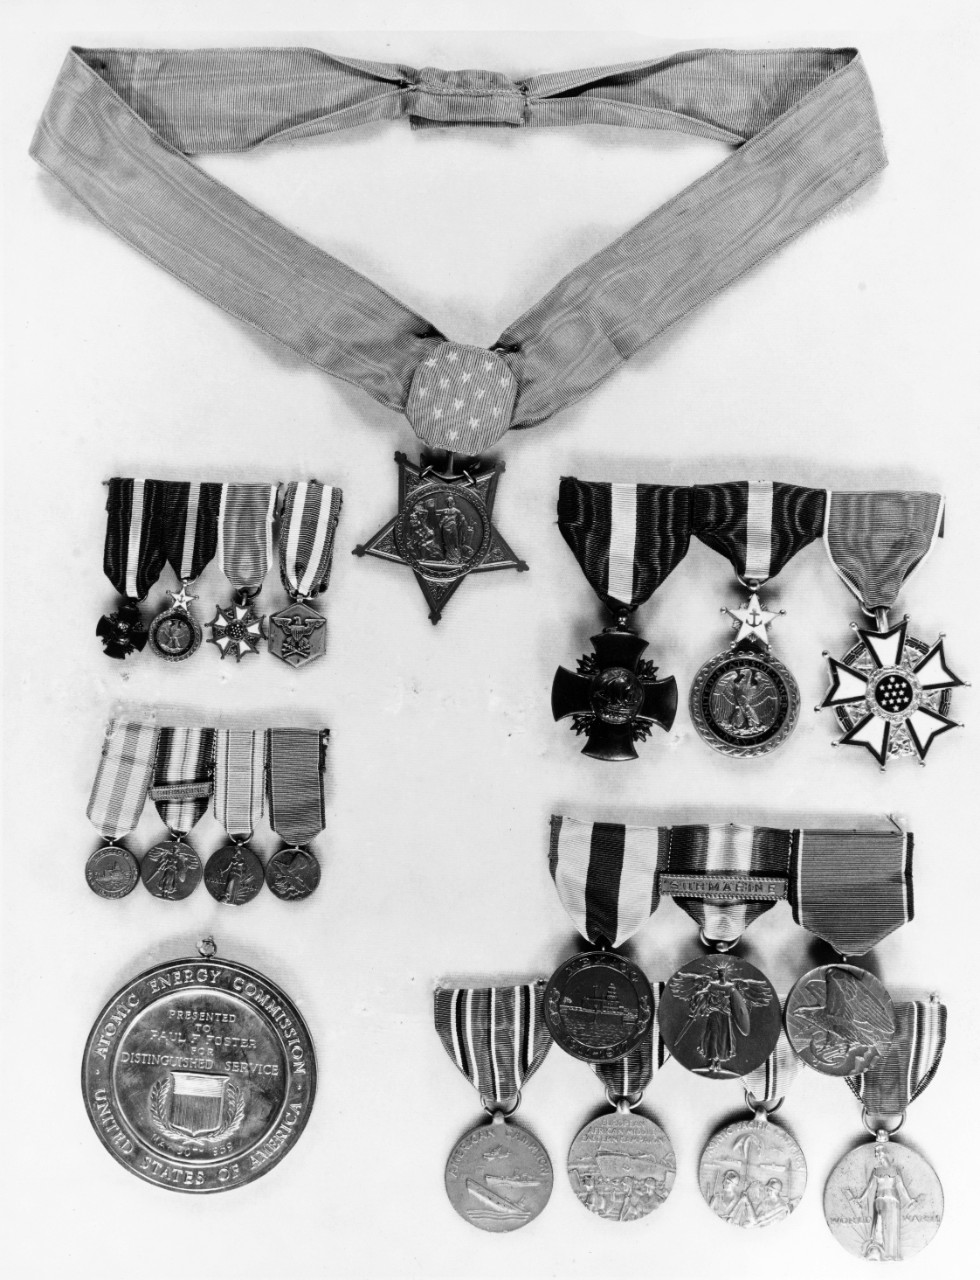 Photo #: NH 103899  Paul F. Foster's military and civilian awards